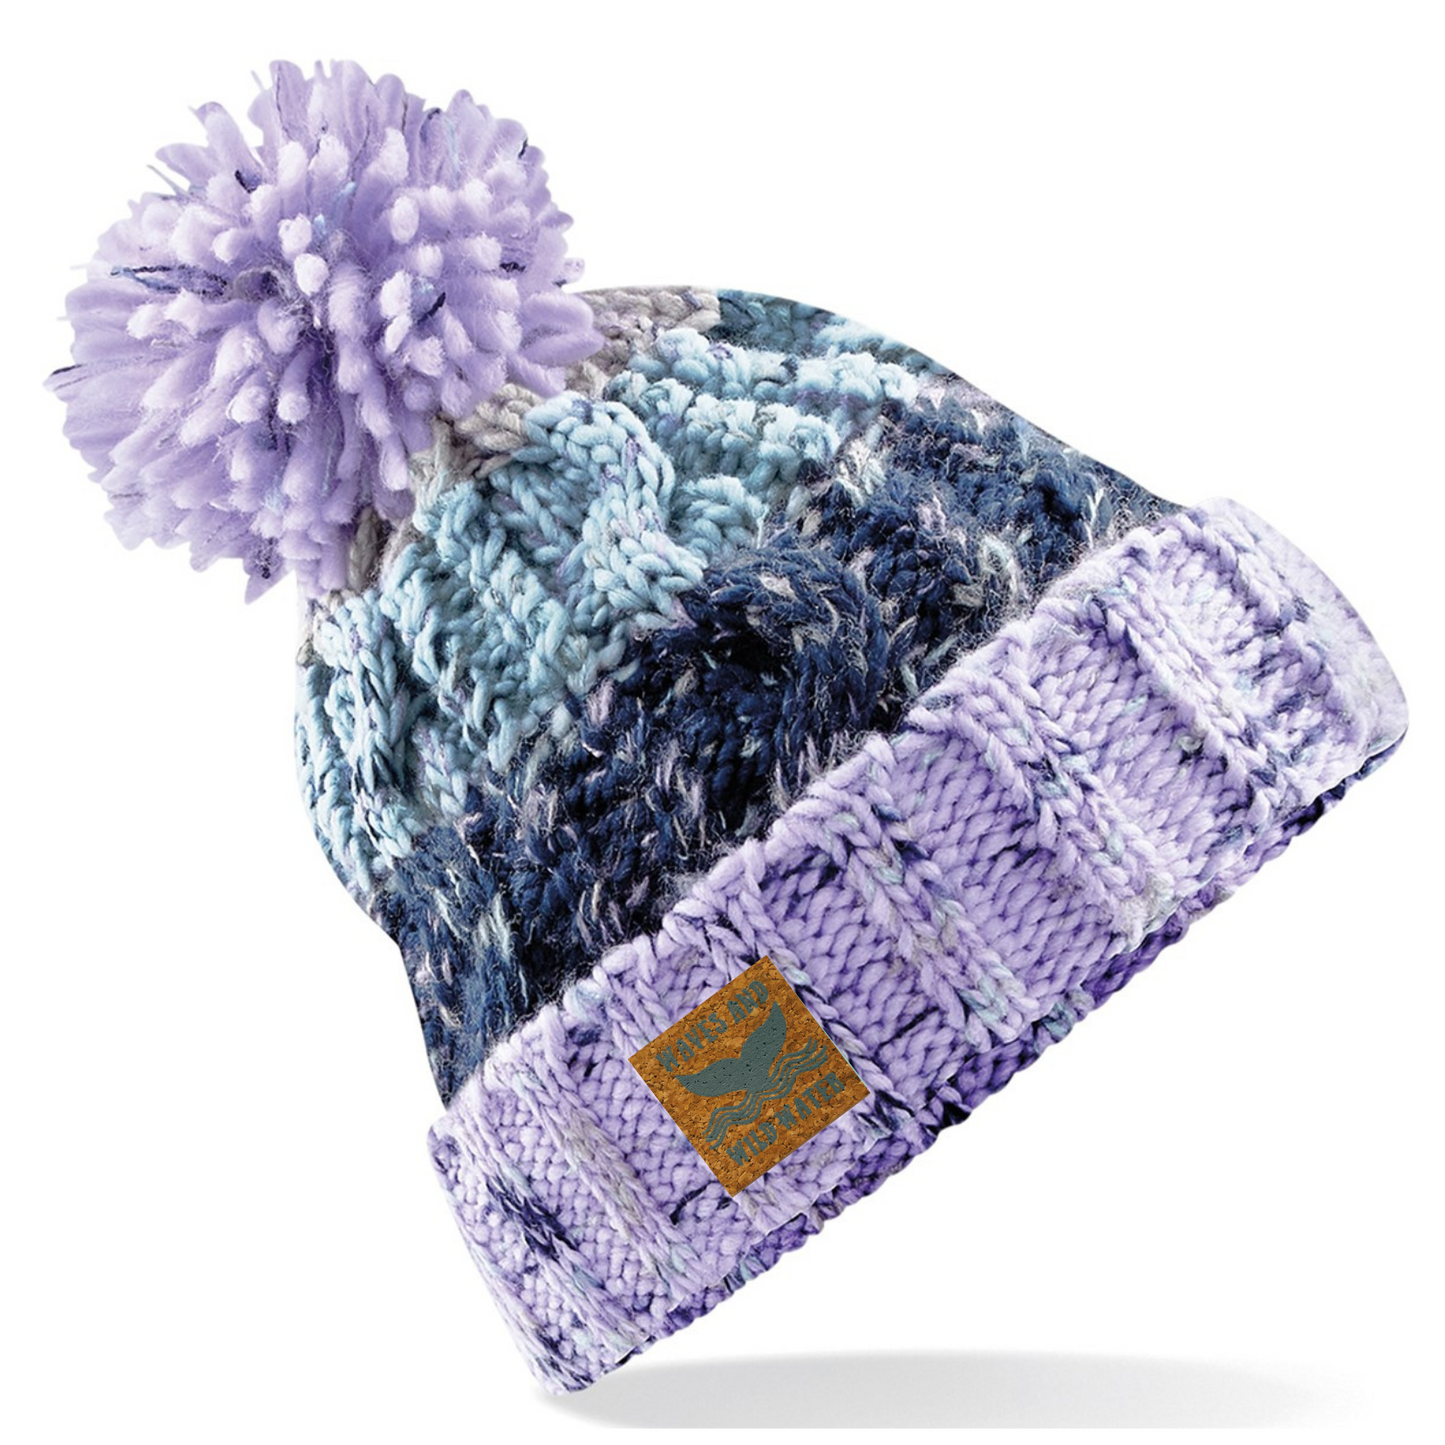 A lilac and blue knitted beanie hat with a pom pom.